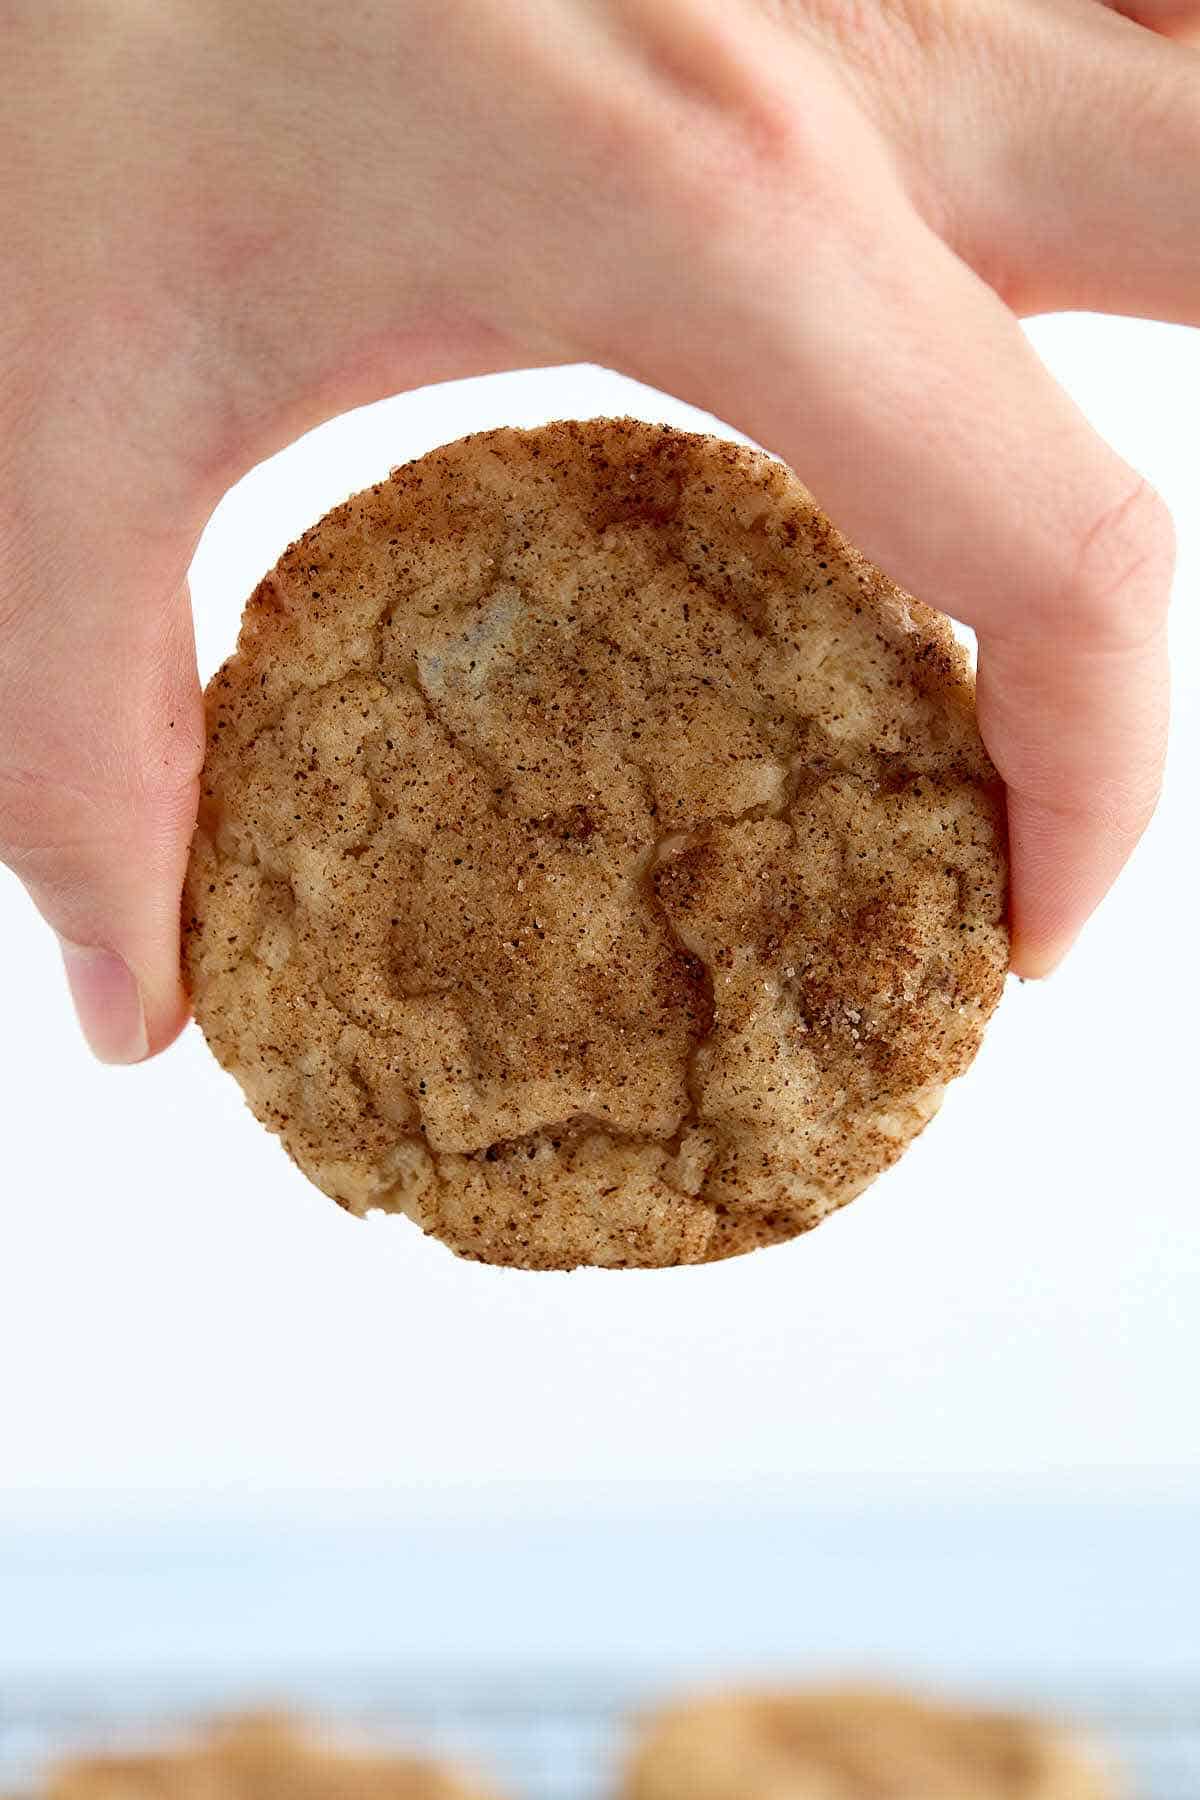 Fingers holding a butter pecan cake mix cookies to show the size and texture.